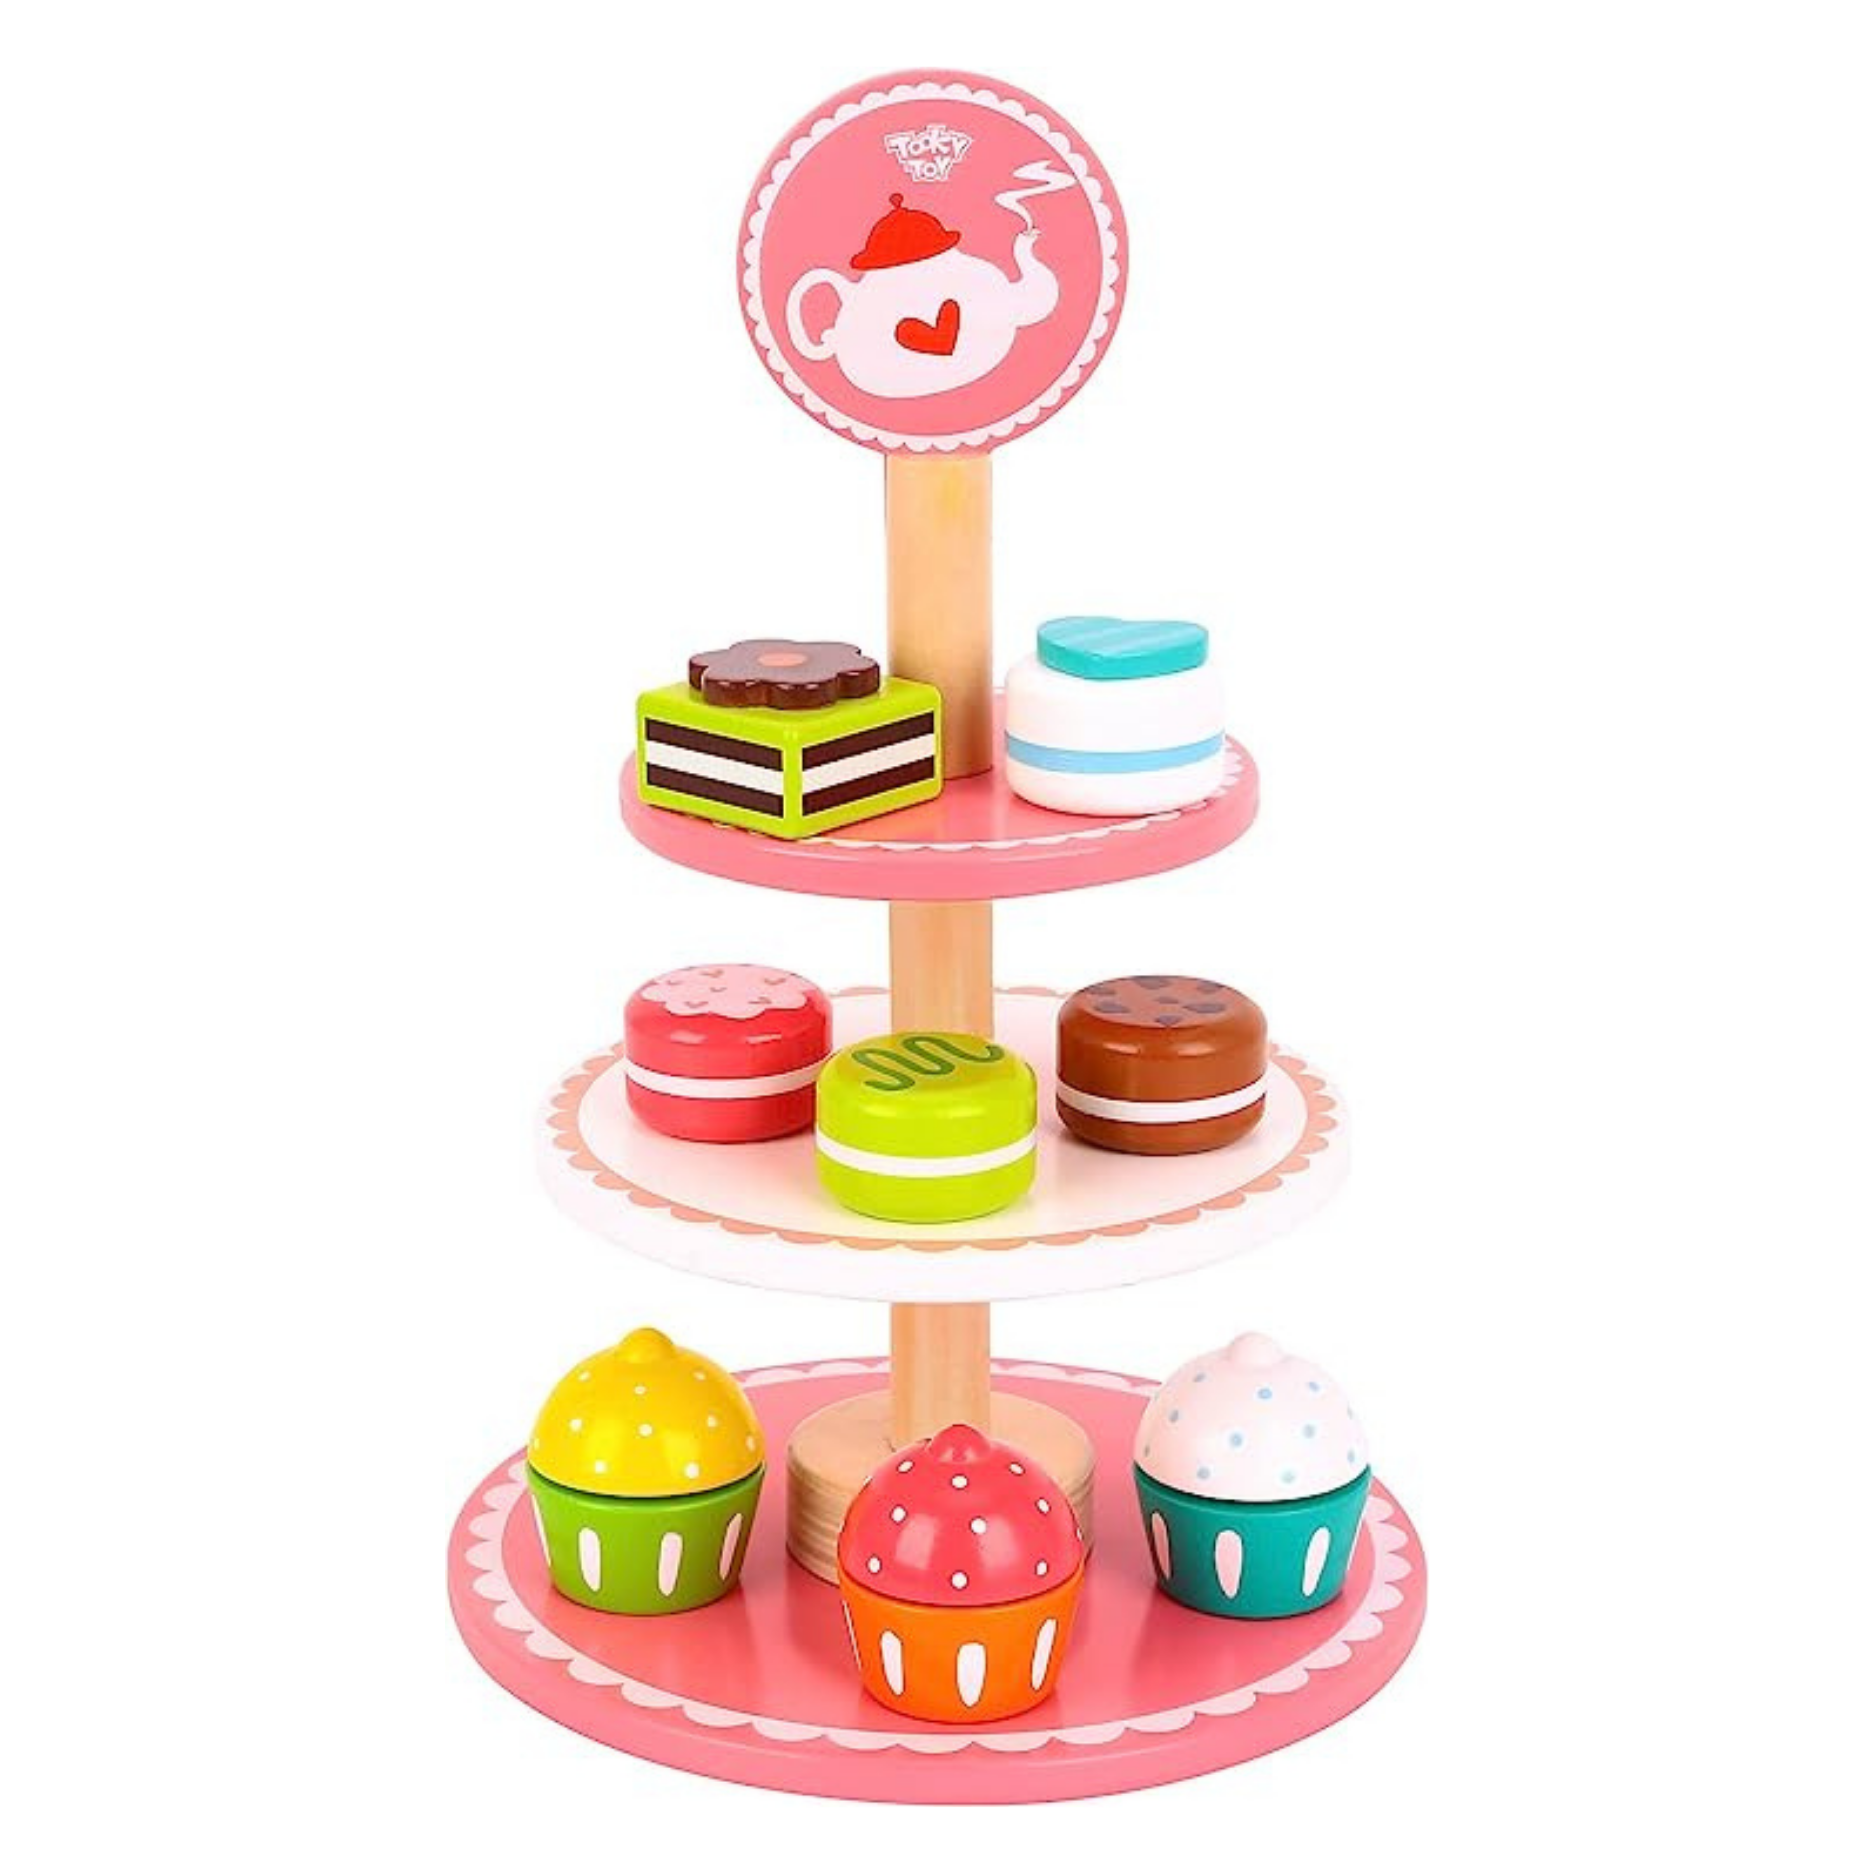 Tooky toys Dessert Stand 